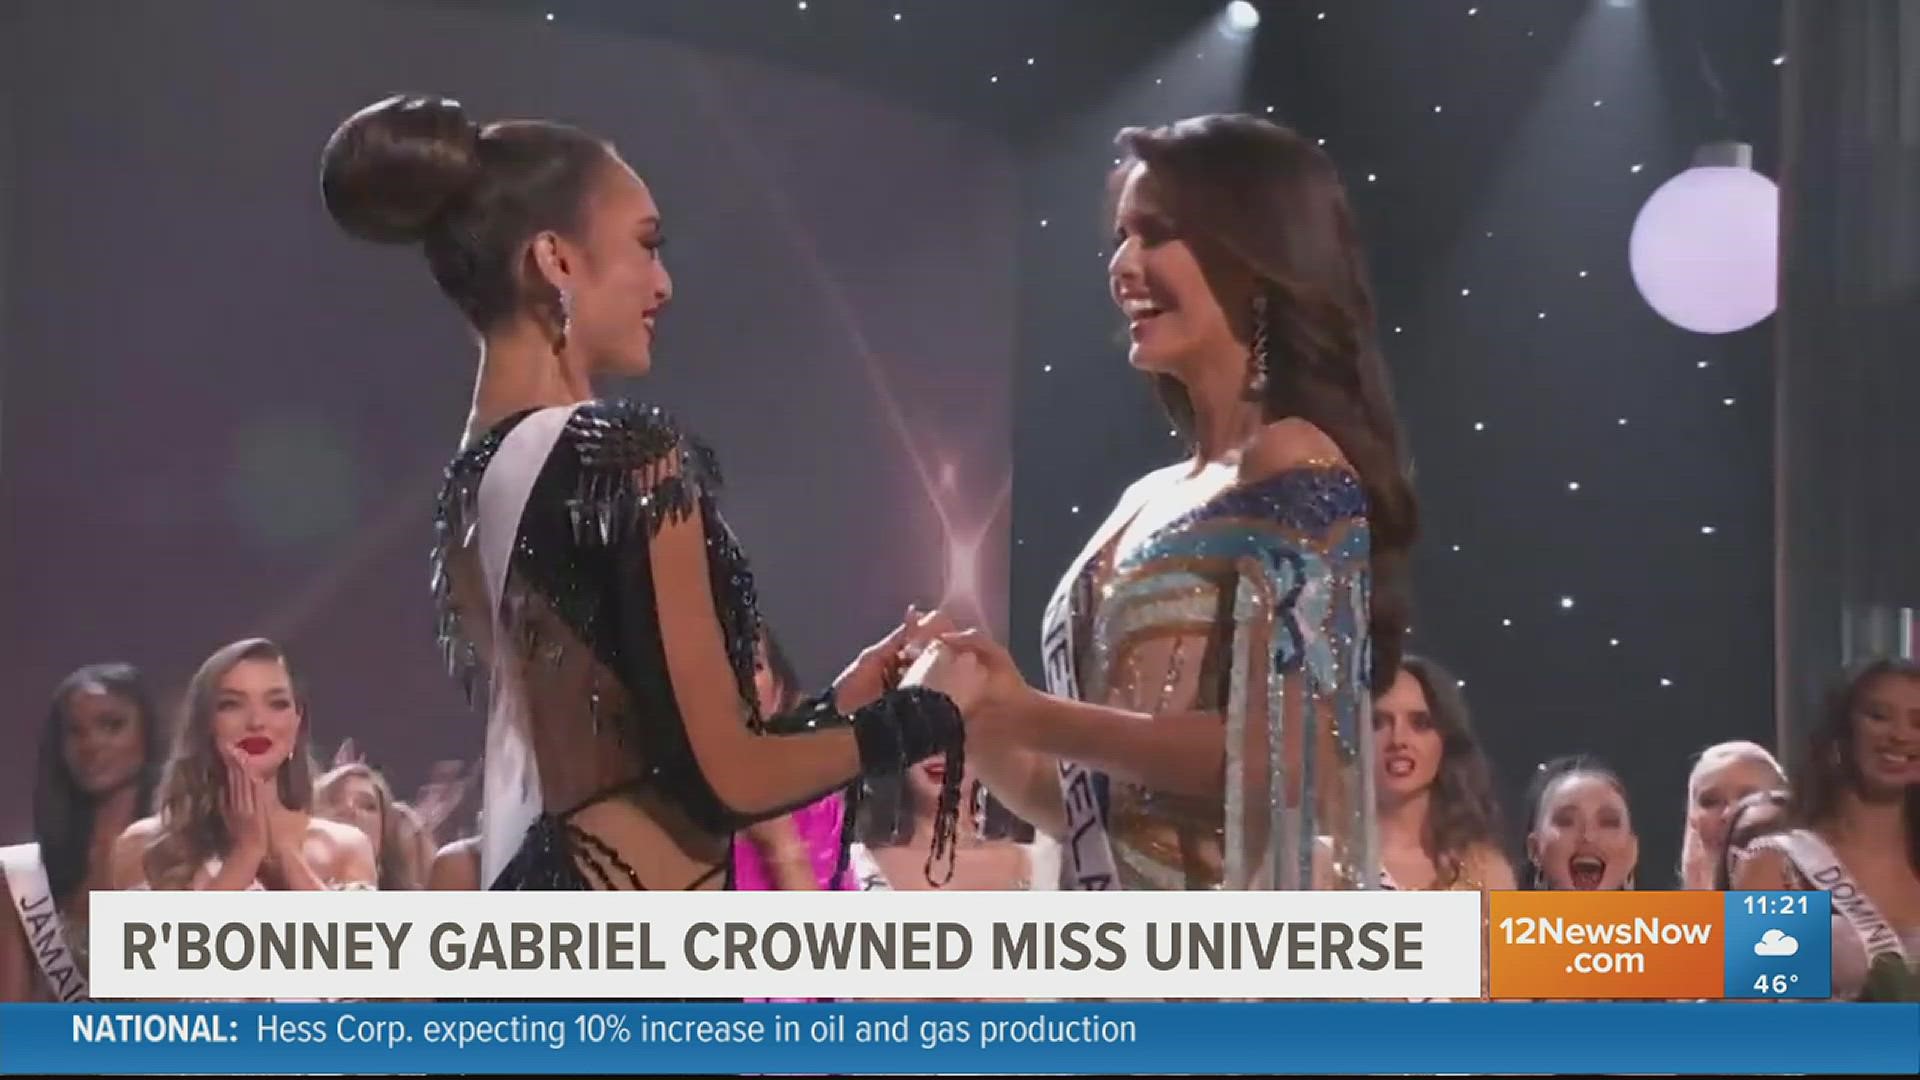 R'Bonney Gabriel became the first Filipino-American to win Miss USA and became Miss Universe just this week. She's from Houston but her mother has ties to Beaumont.